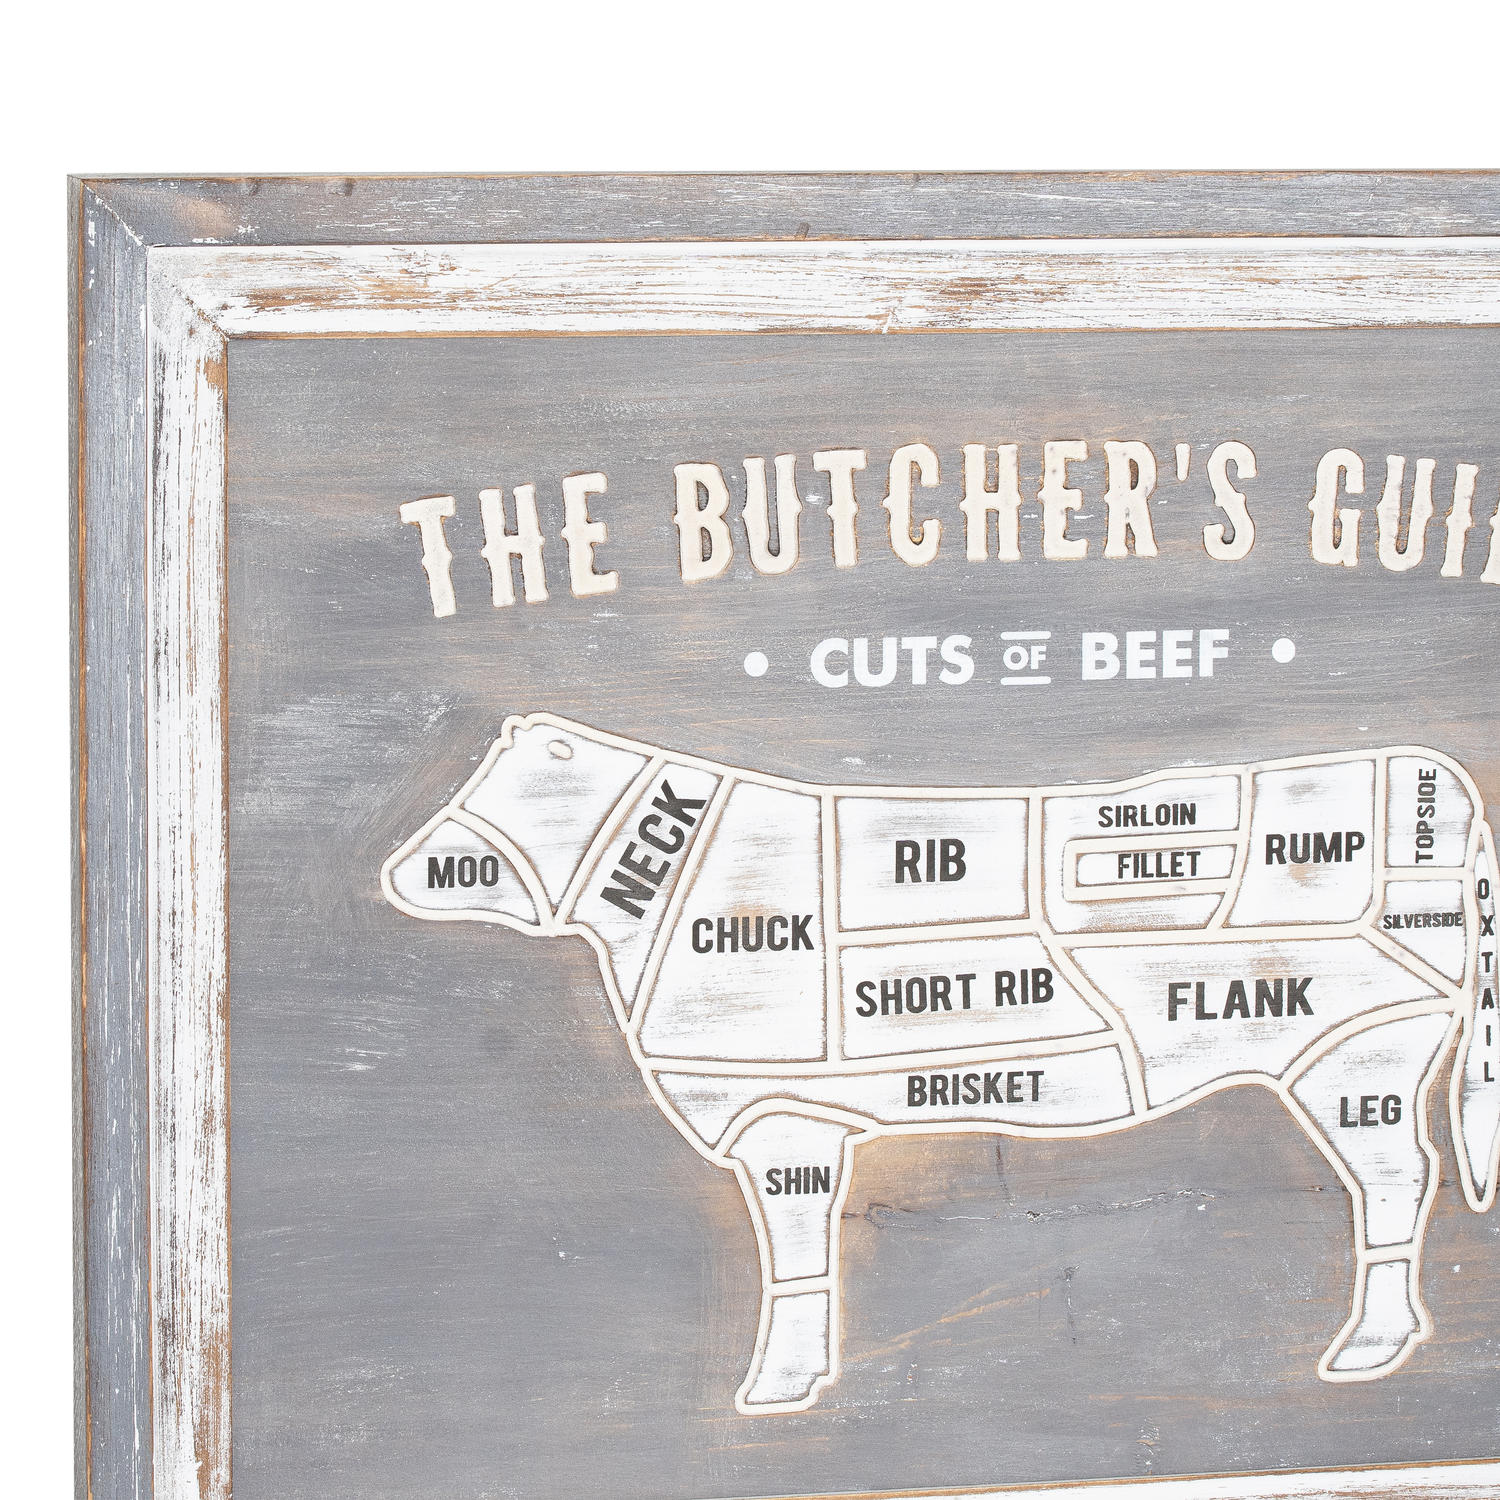 Butchers Cuts Beef Wall Plaque - Image 2